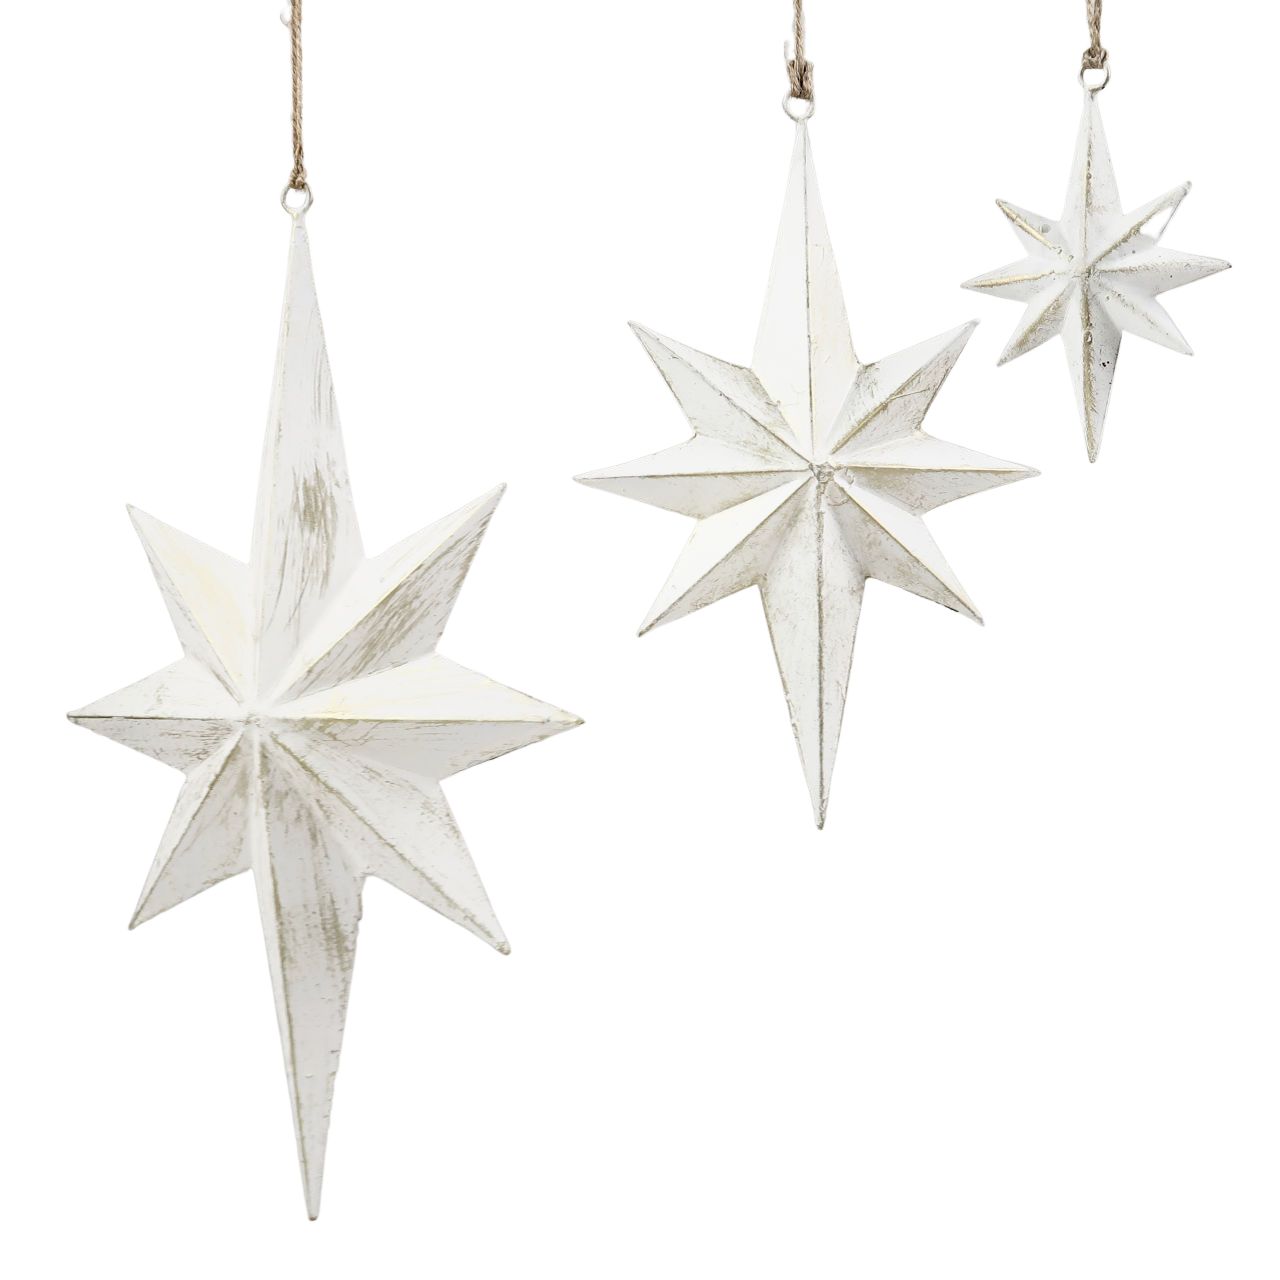 Grand Illusions 3 White Vintage Star Decorations